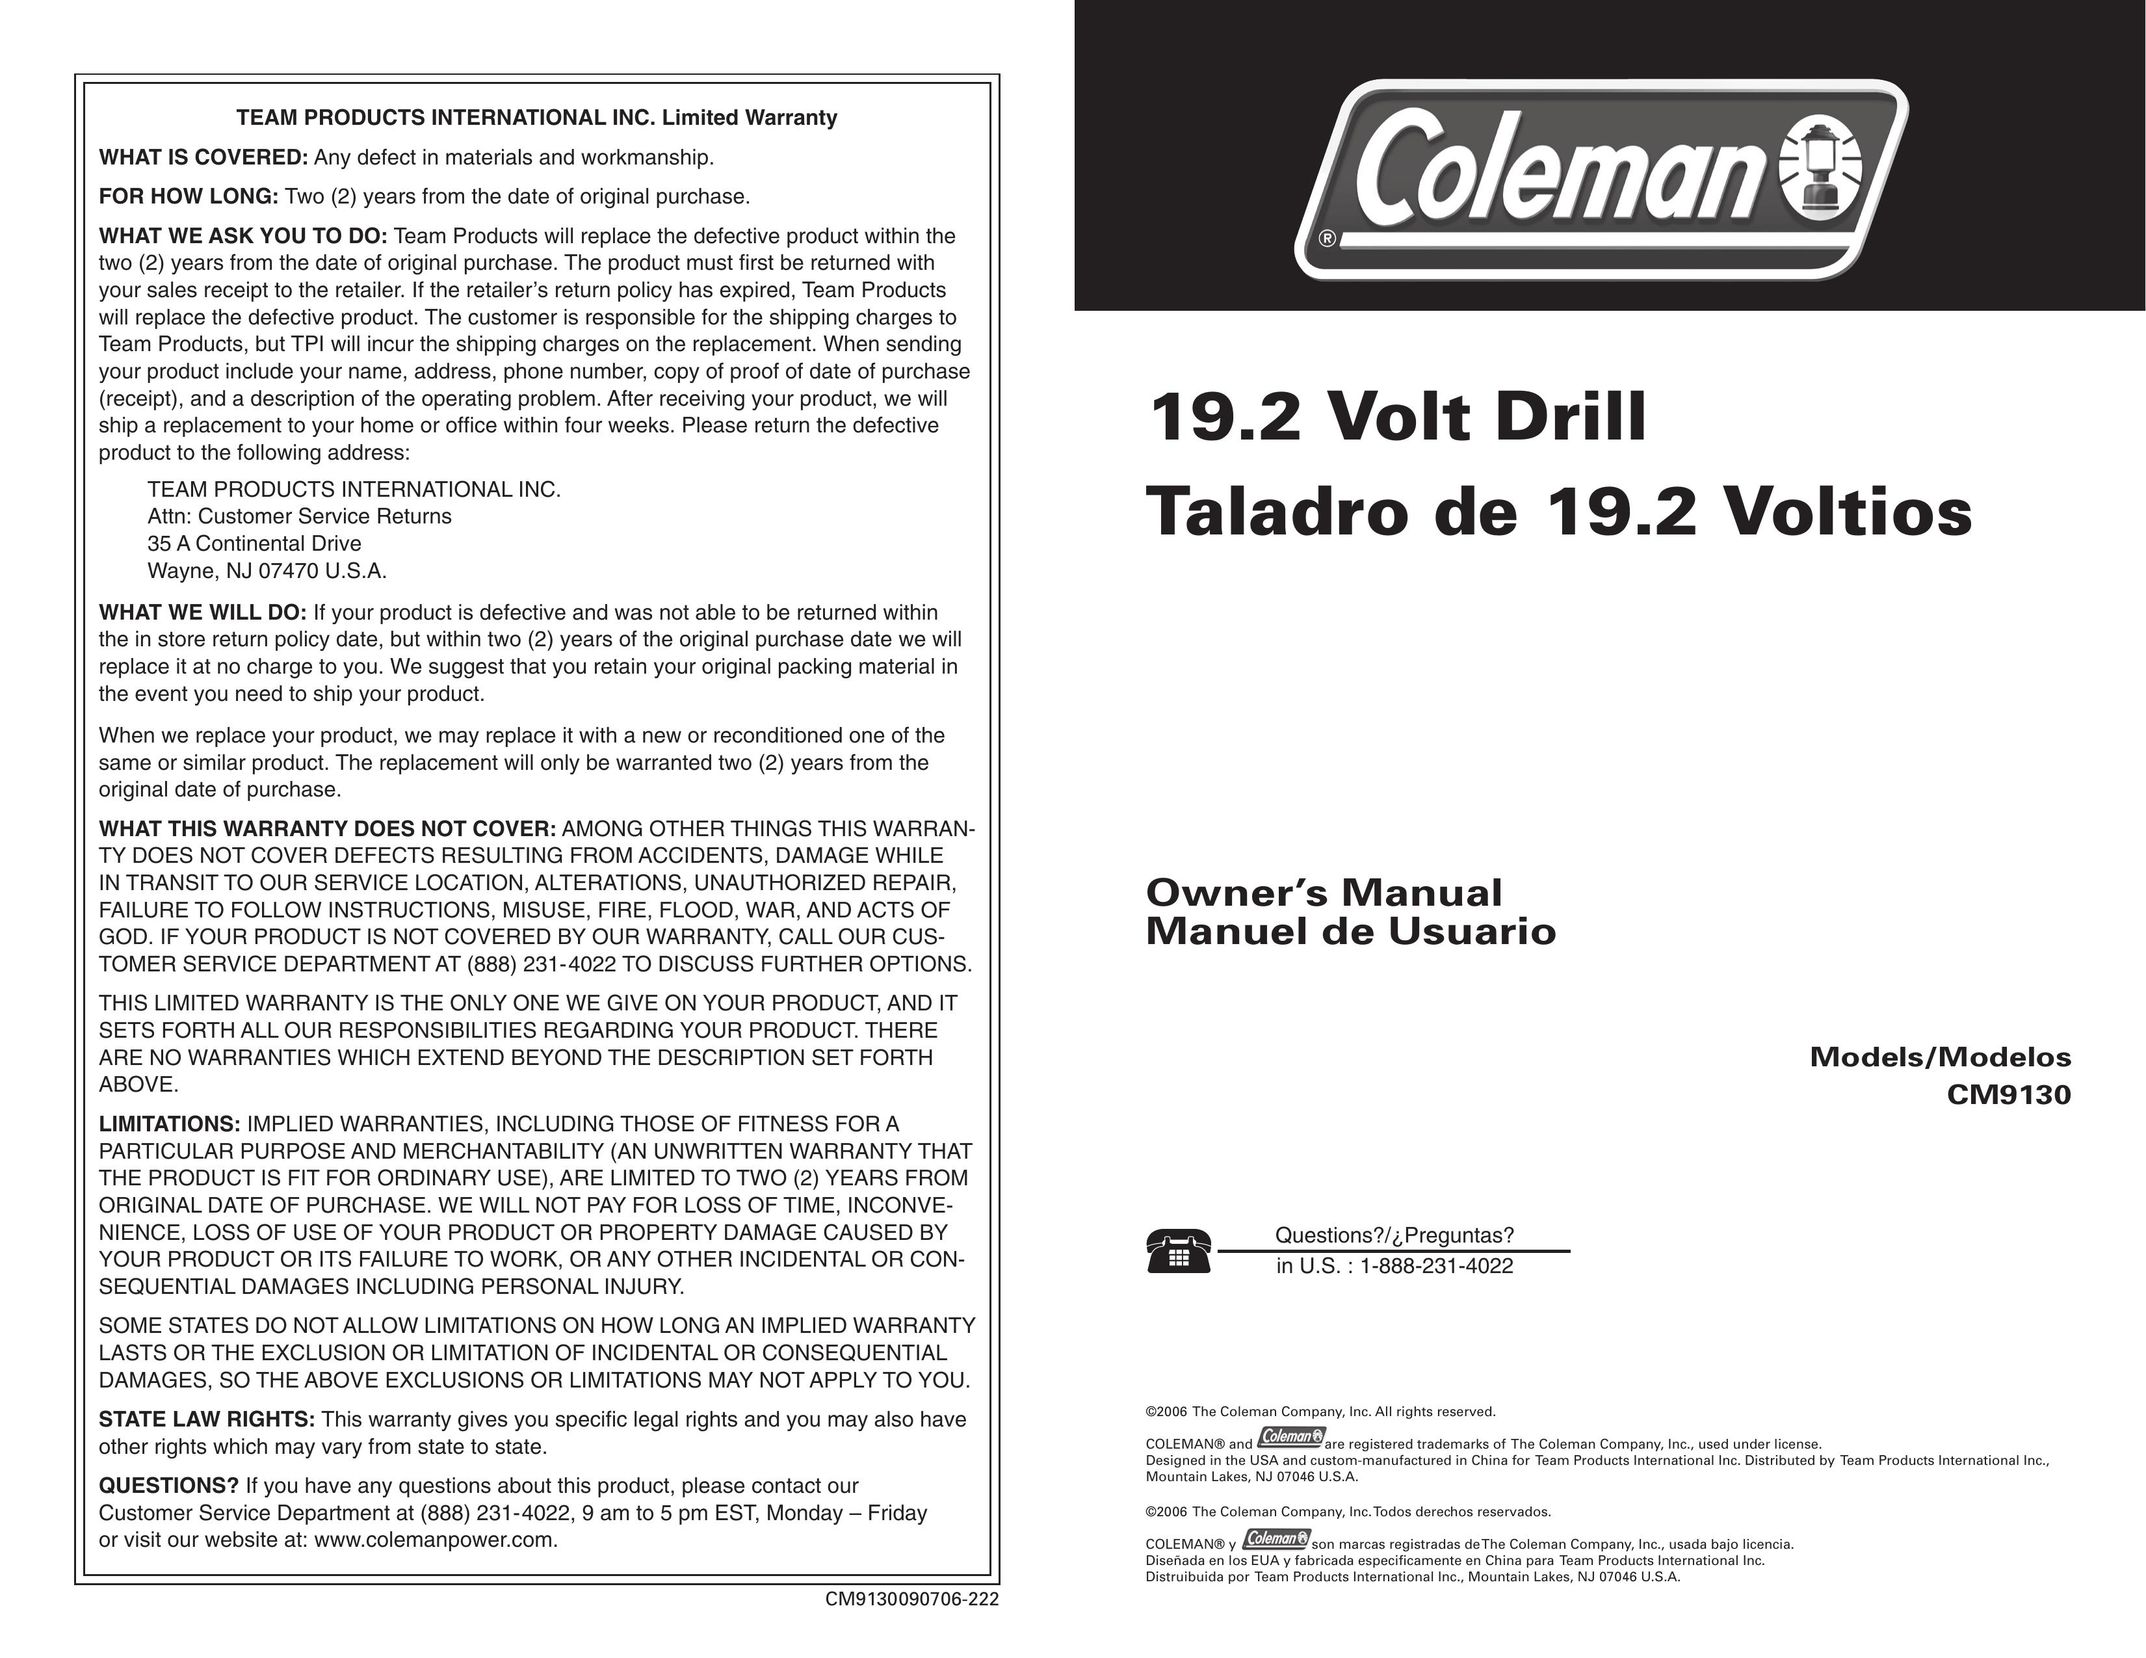 Team Products CM9130 Drill User Manual